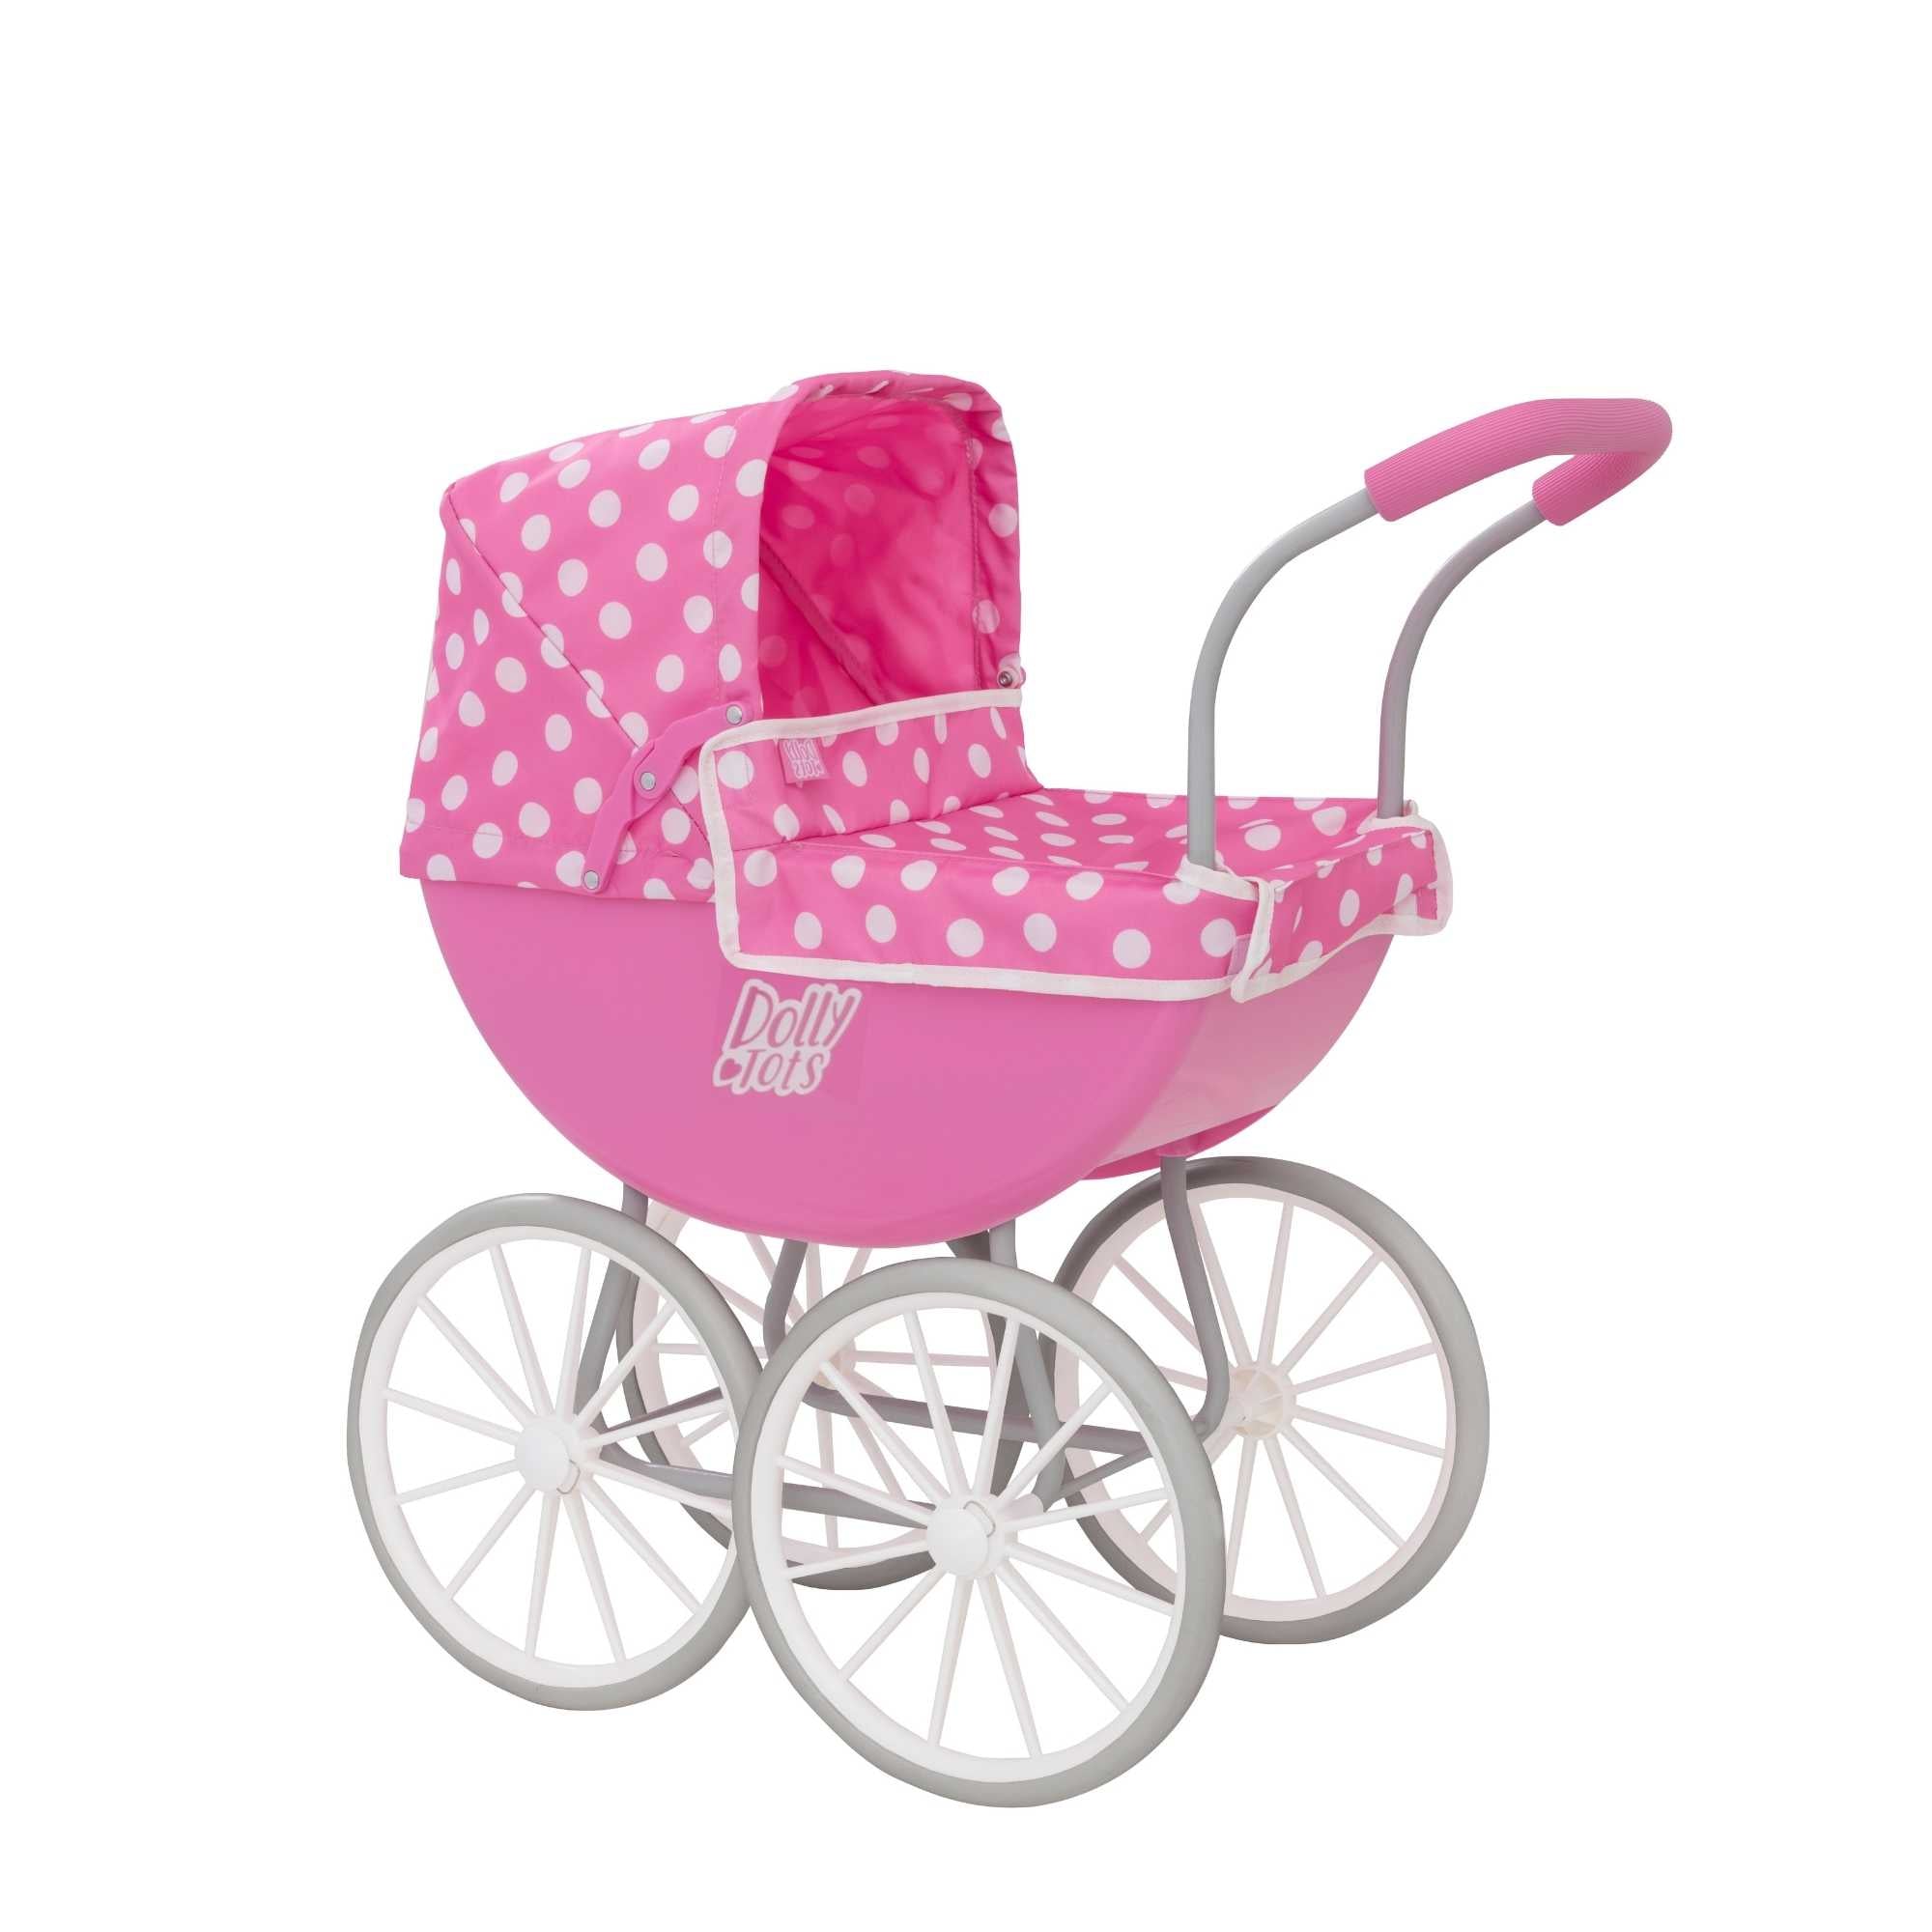 Dolly Tots My First Carriage Dolls Pram